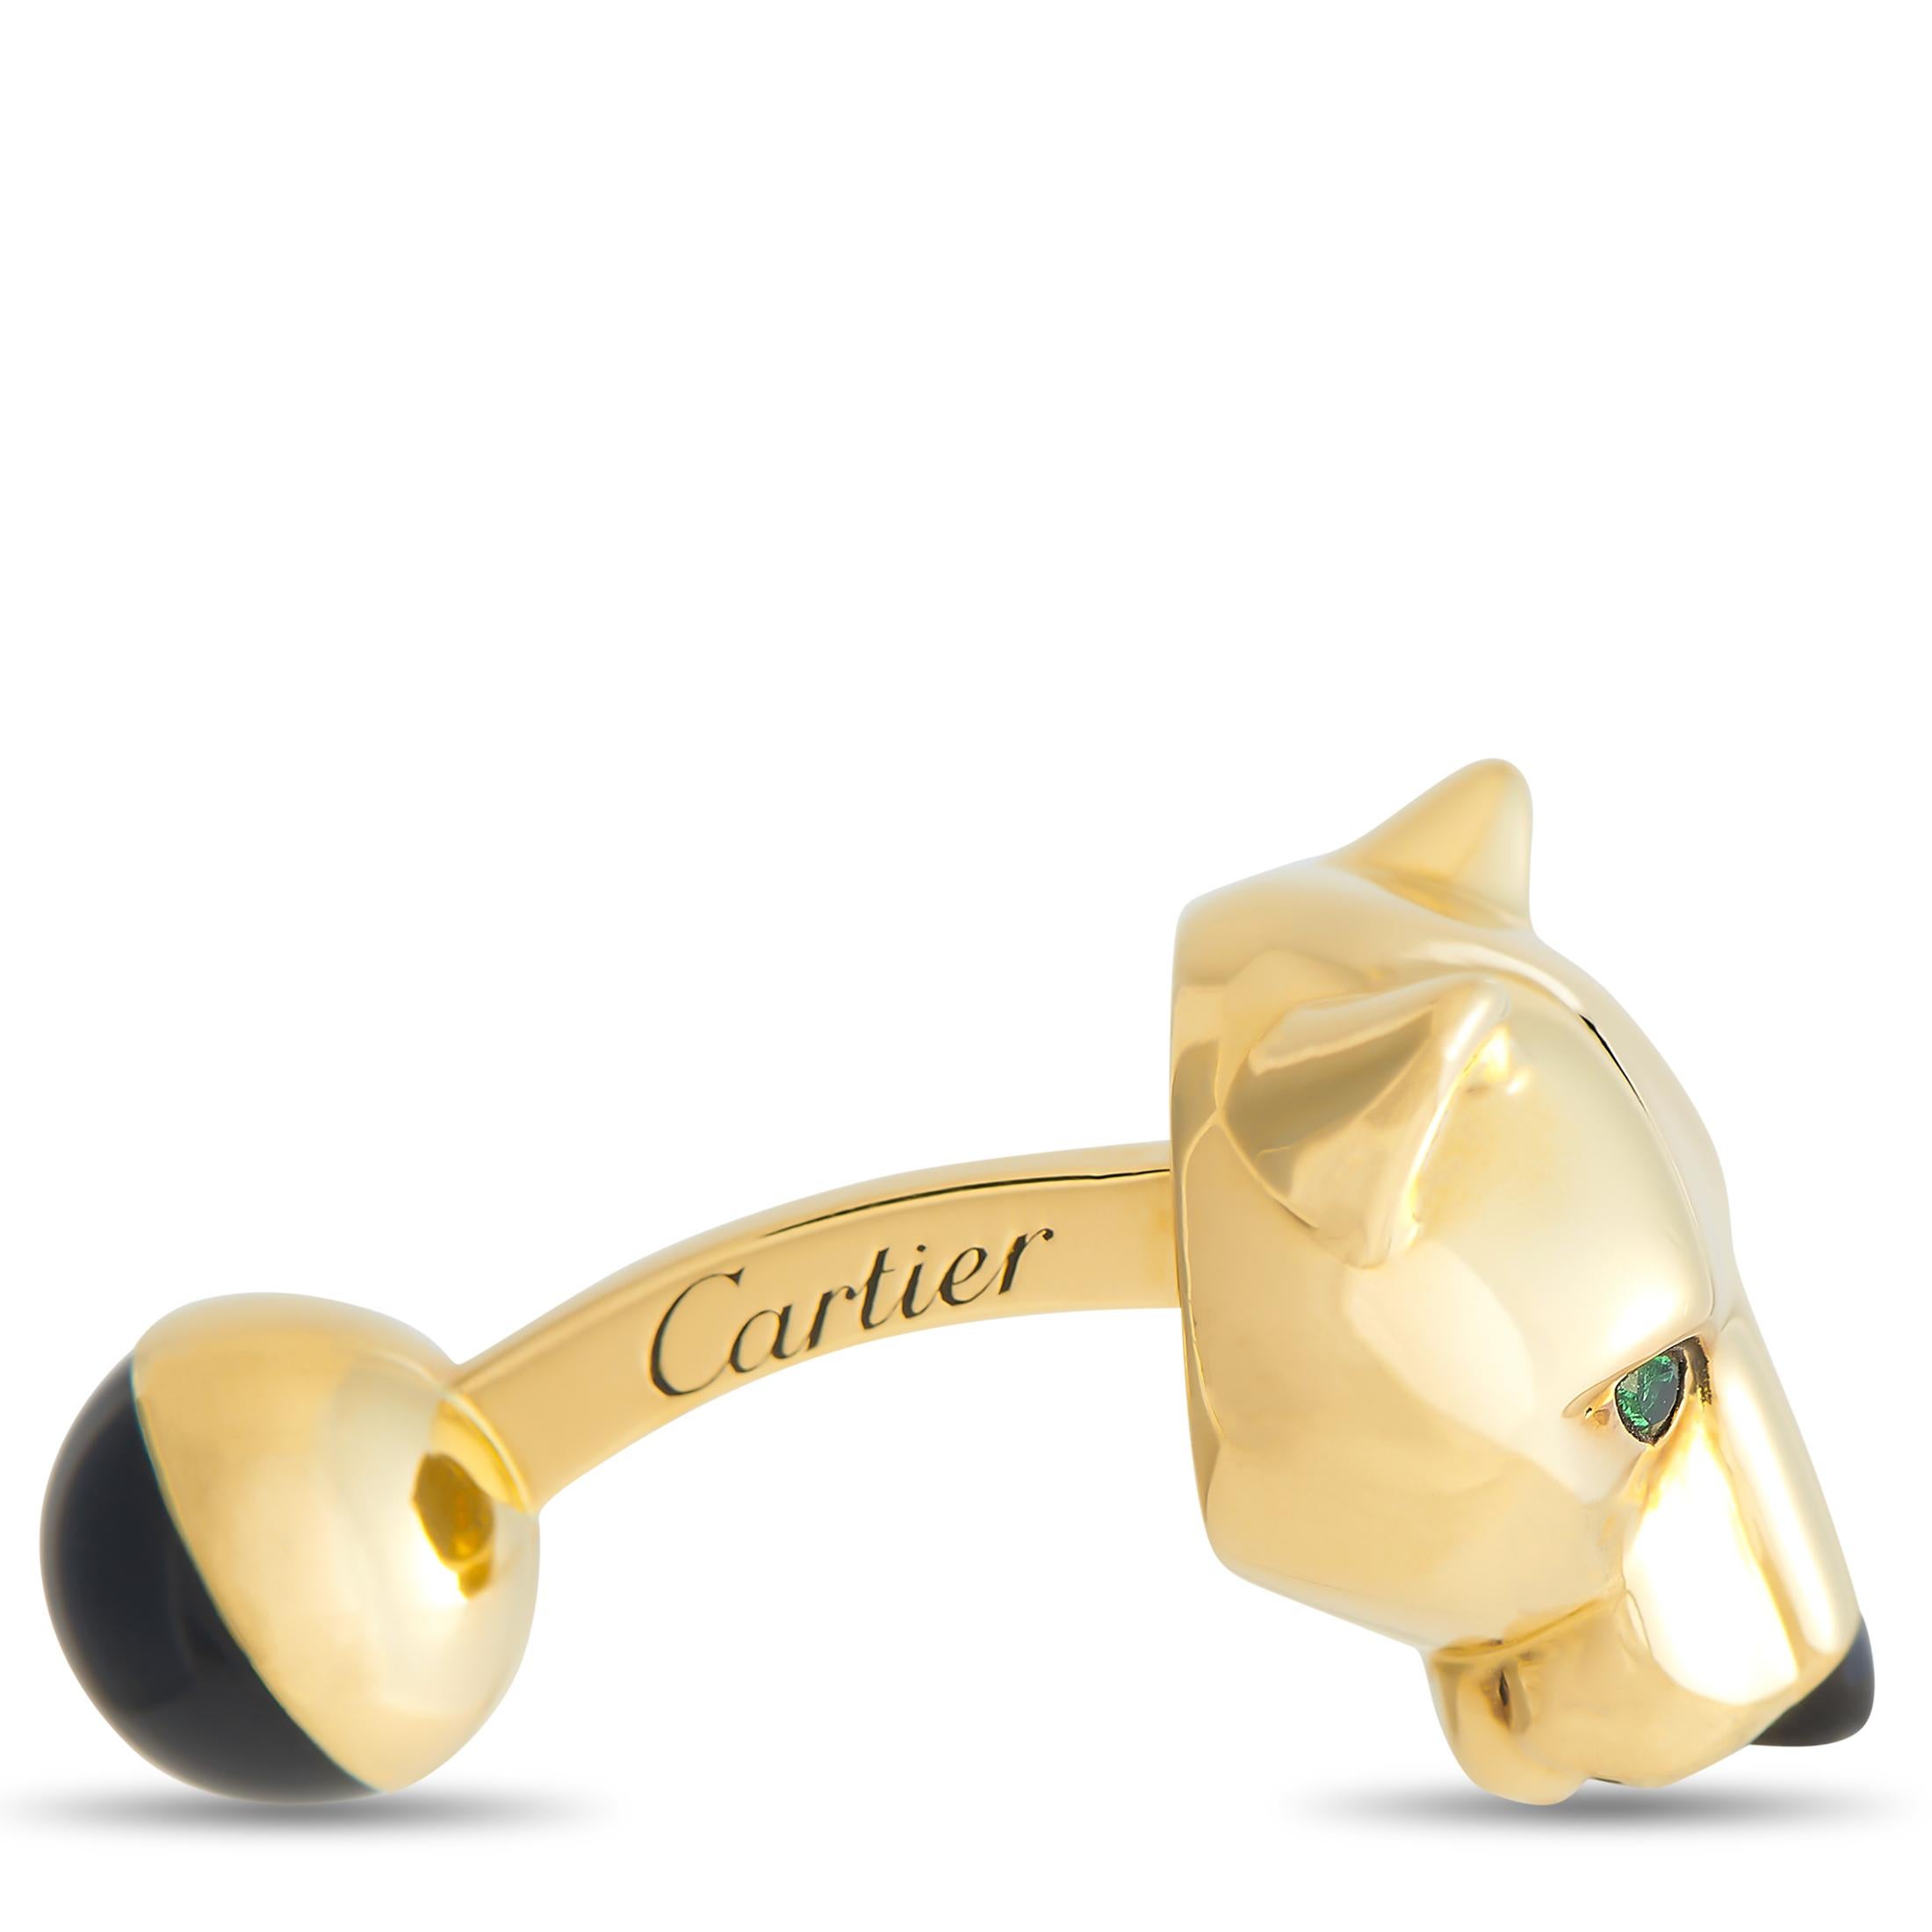 A rare find, this fully signed Cartier18K Yellow Gold Panthere Cufflinks would make a great gift for someone special. This yellow gold accessory features the Panthere, an iconic creature in the jewelry world. Each cufflink has a sculpted panther